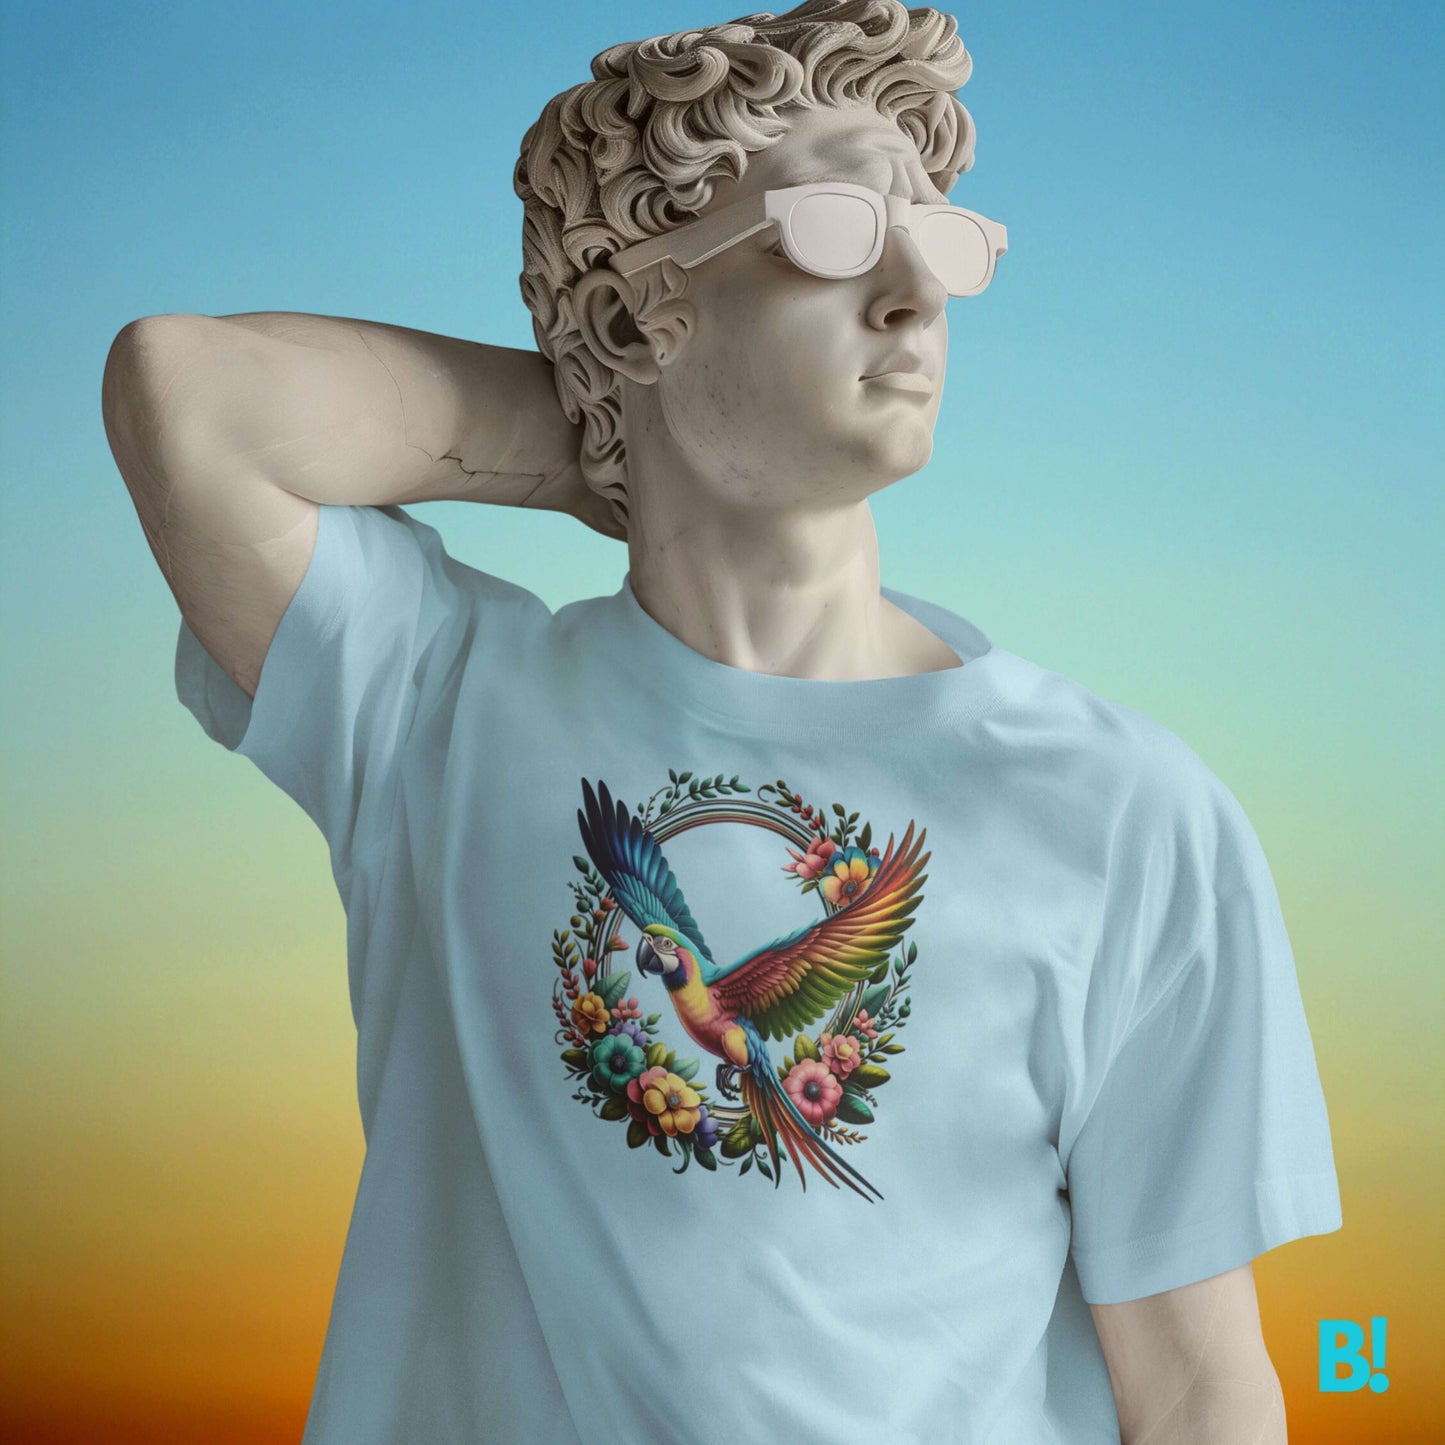 PARROTDISE Tropical Tee: Embrace Summer Style Dive into summer with PARROTDISE's vibrant tropical t-shirt. Available in S-XXXL, enjoy paradise in comfort & color. Ideal beachwear for all. €29.50 B!NKY Comfywear